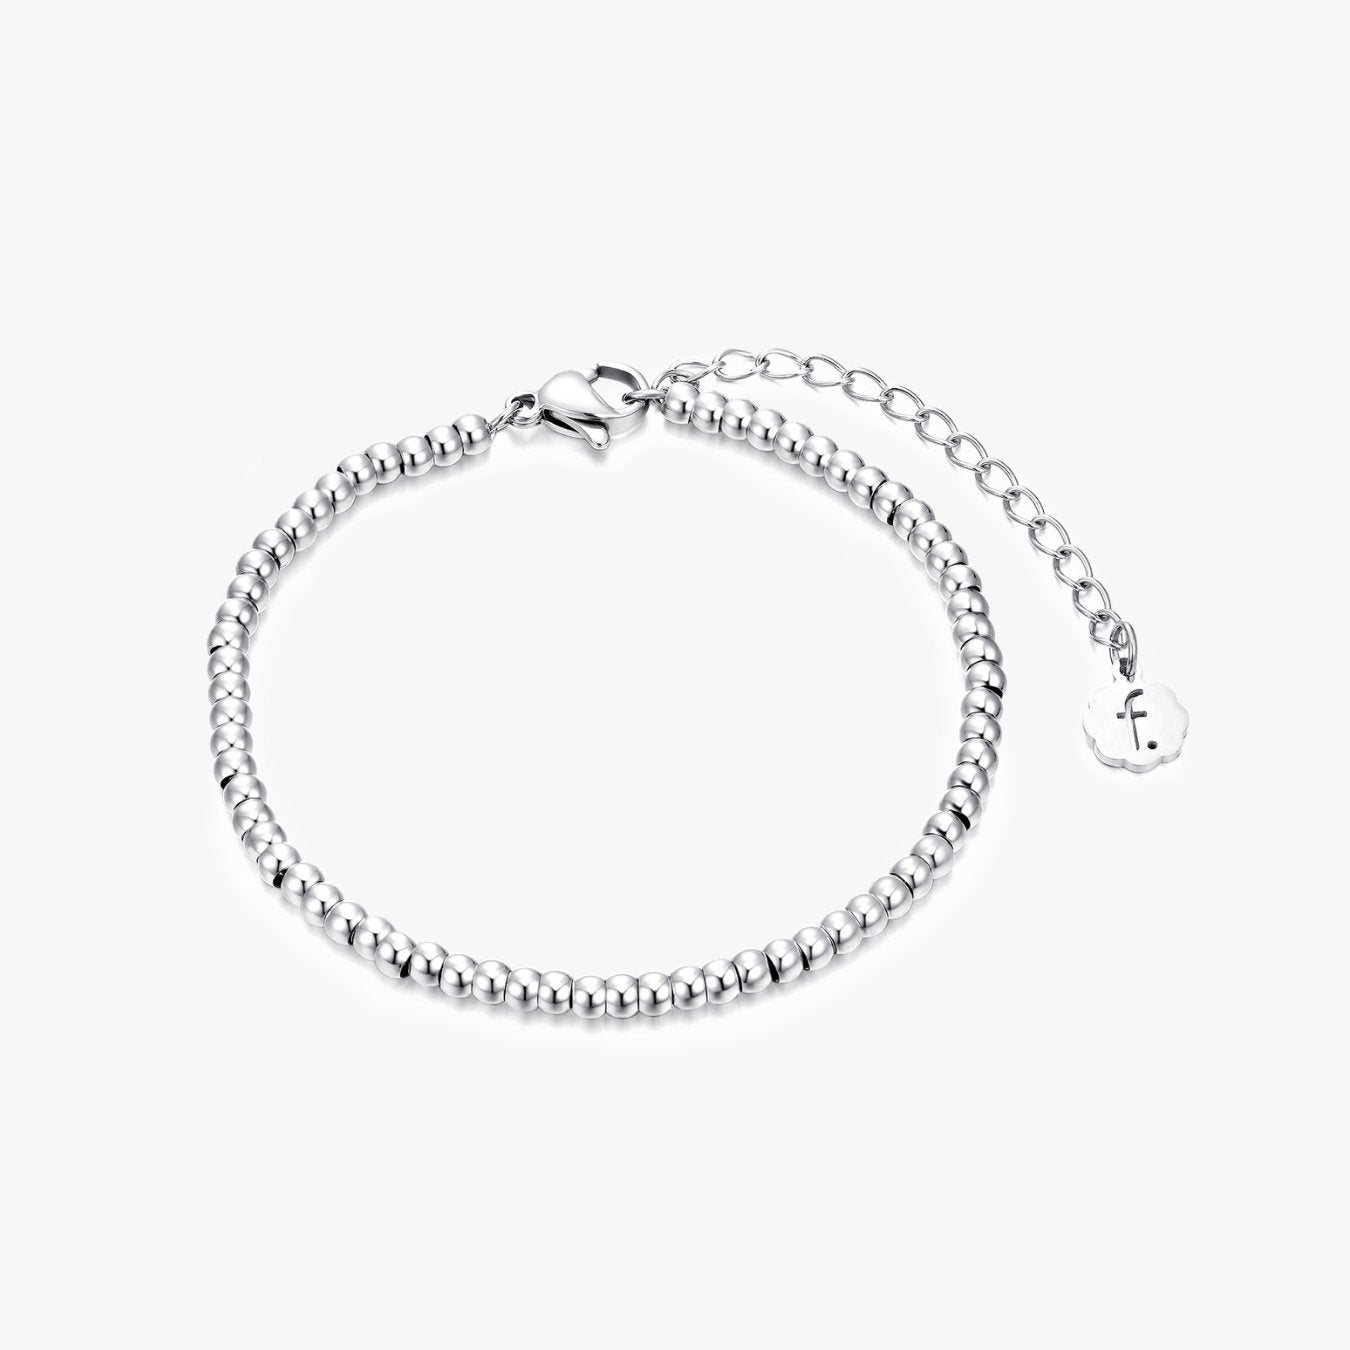 Beaded Chain Bracelet in Silver - Flaire & Co.